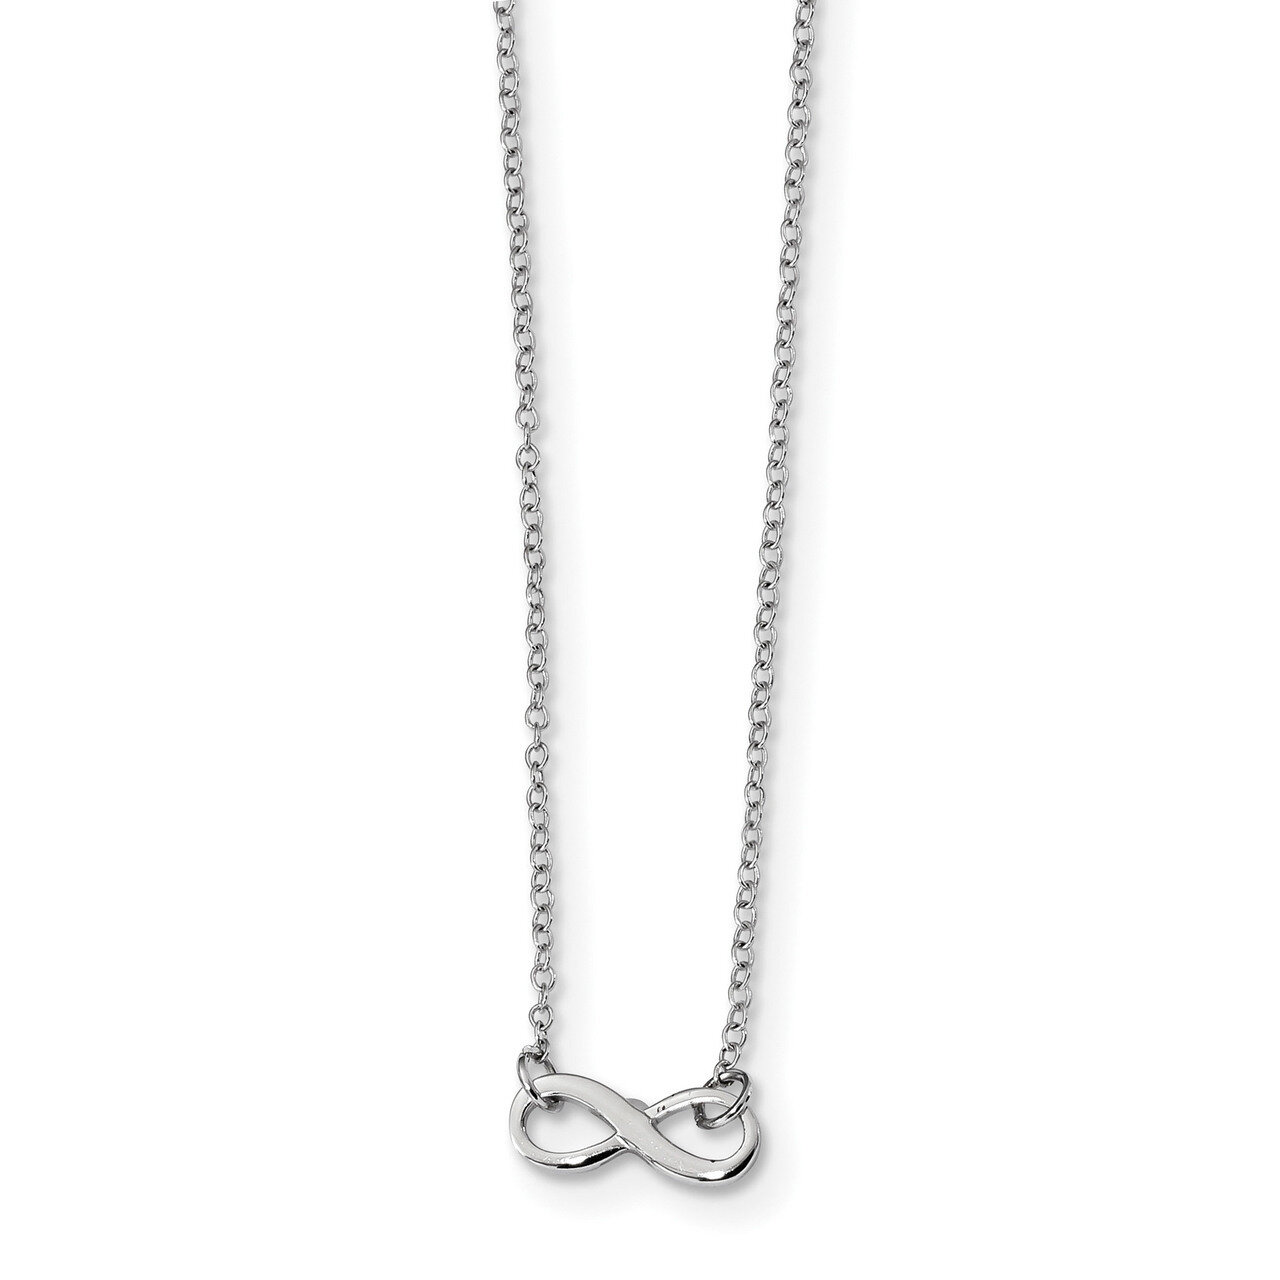 2 inch Extender Infinity Necklace 16 Inch Sterling Silver Rhodium-plated QG4394-16